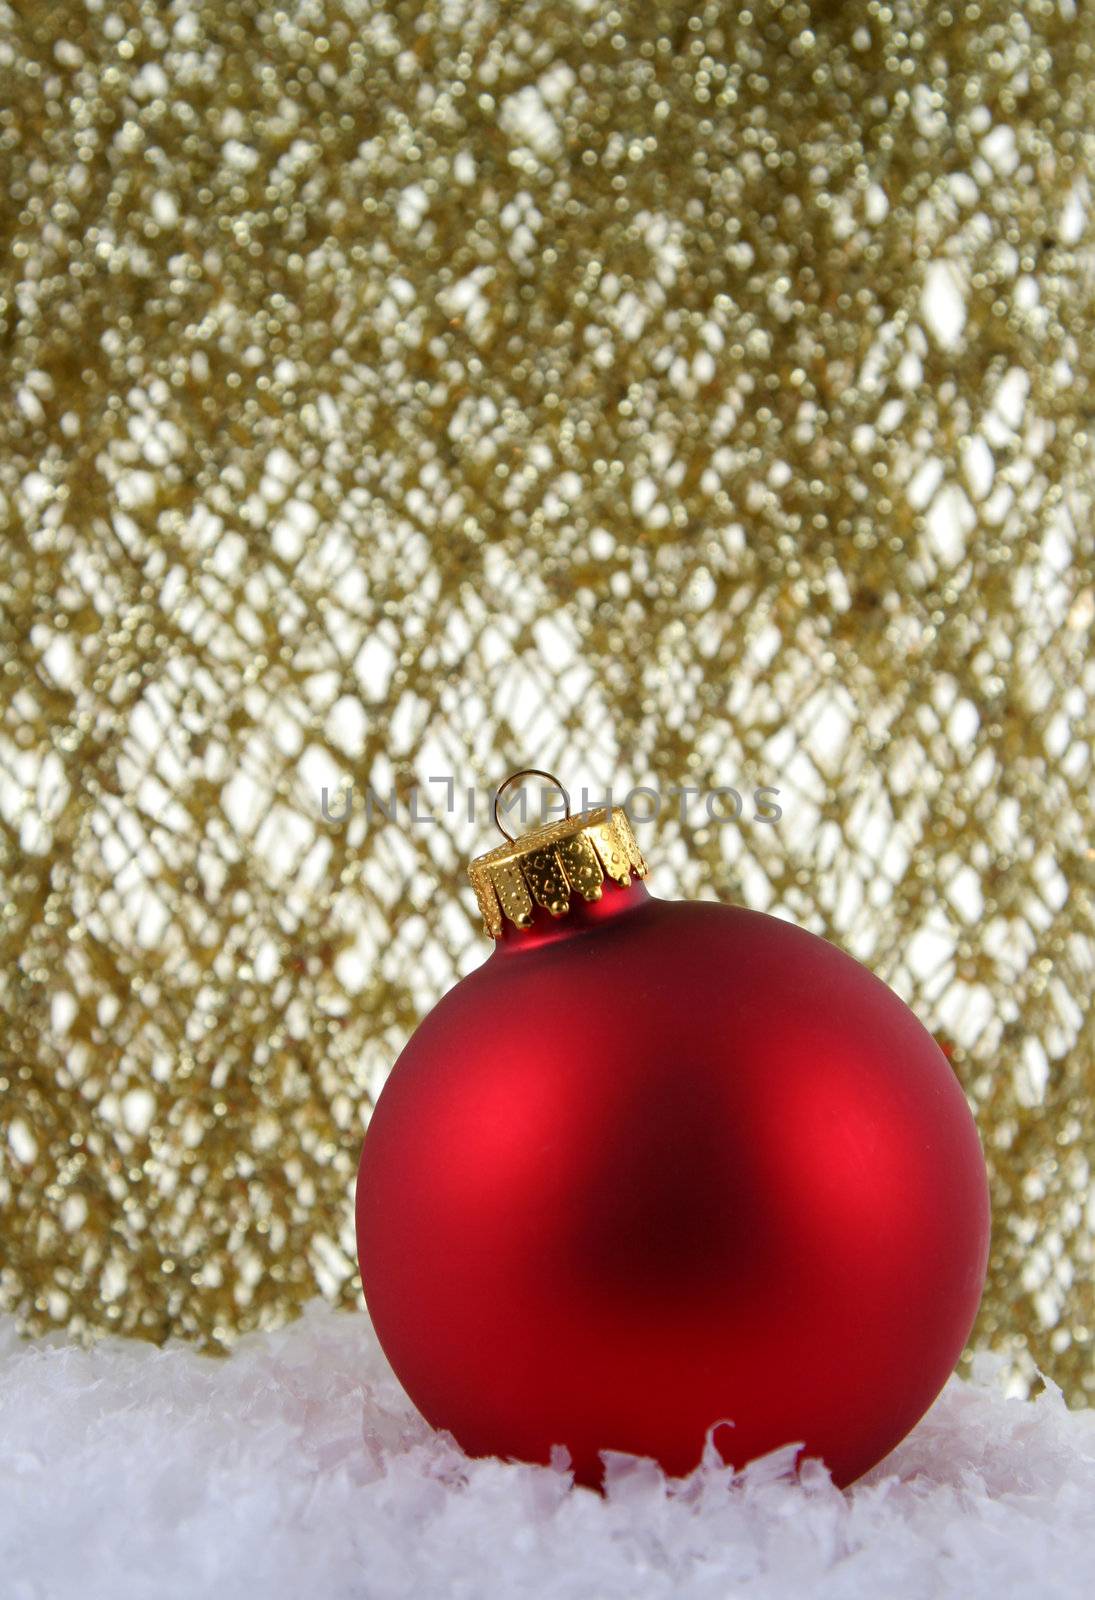 Red Bauble against Gold Glitter
 by ca2hill